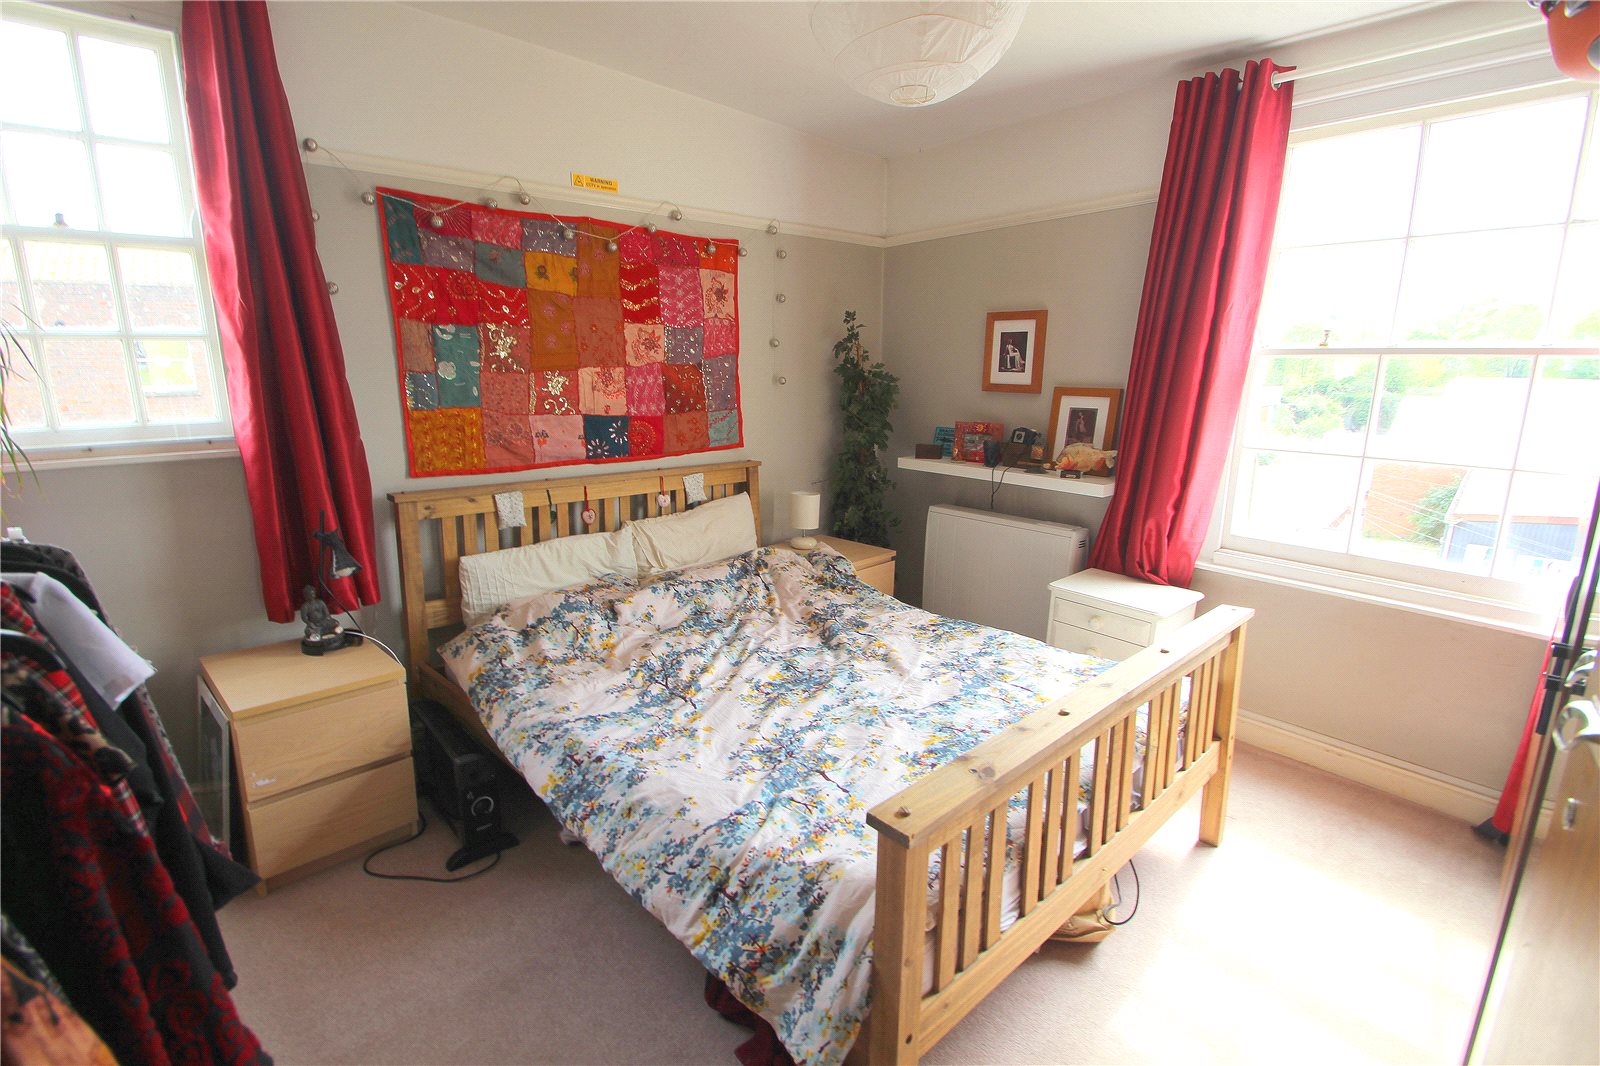 Cj Hole Southville 1 Bedroom Flat To Rent In York Road